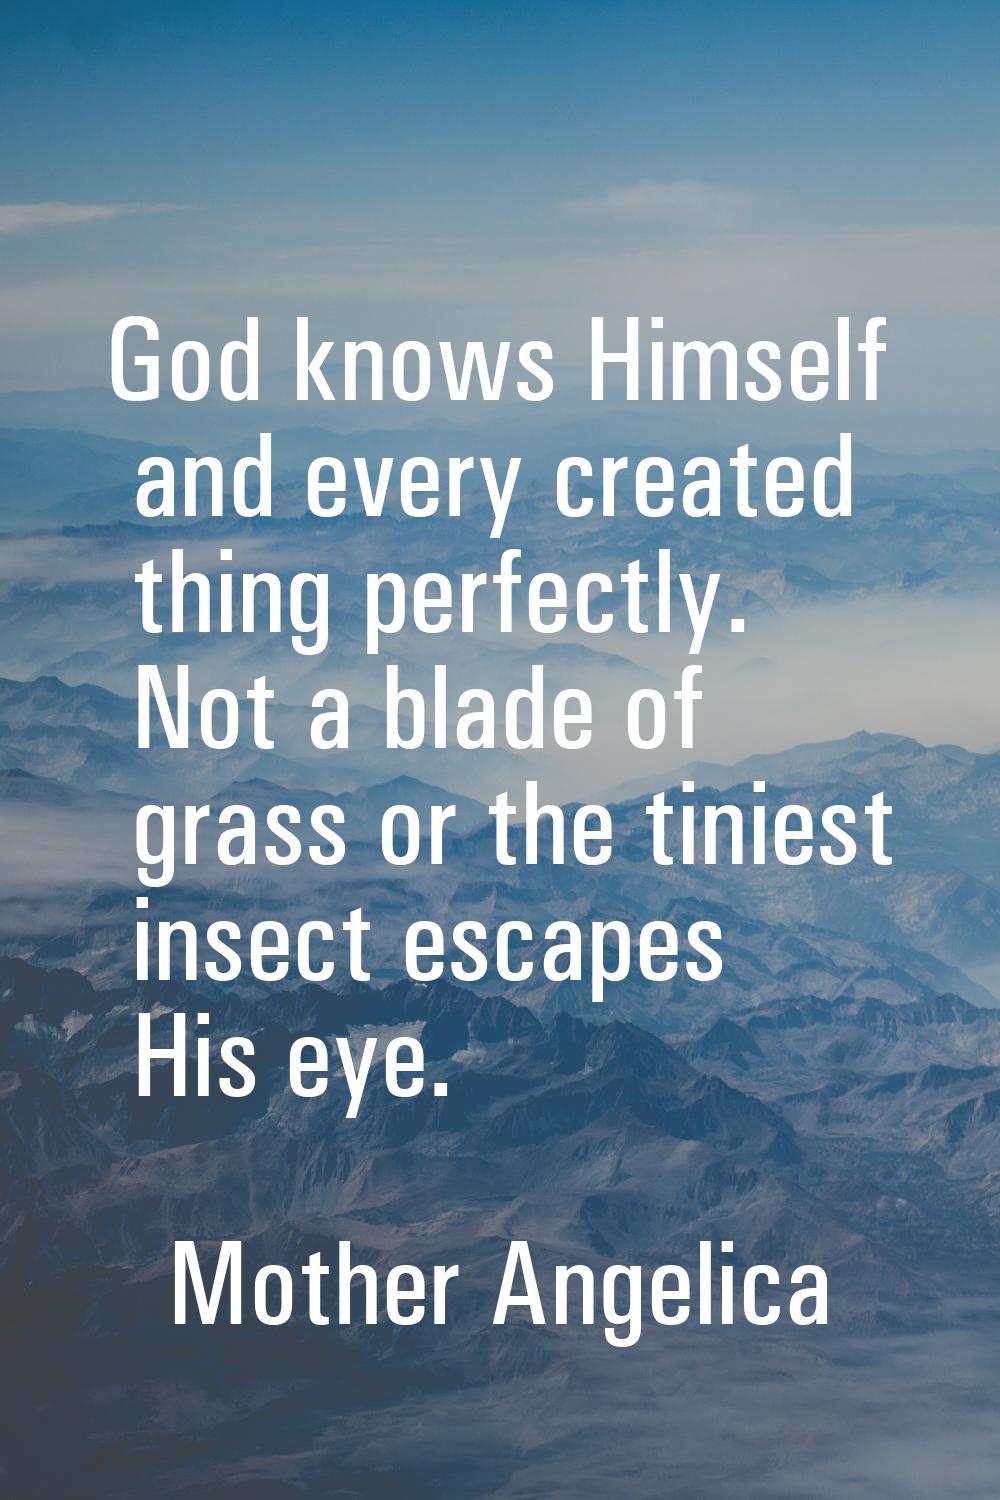 God knows Himself and every created thing perfectly. Not a blade of grass or the tiniest insect esc